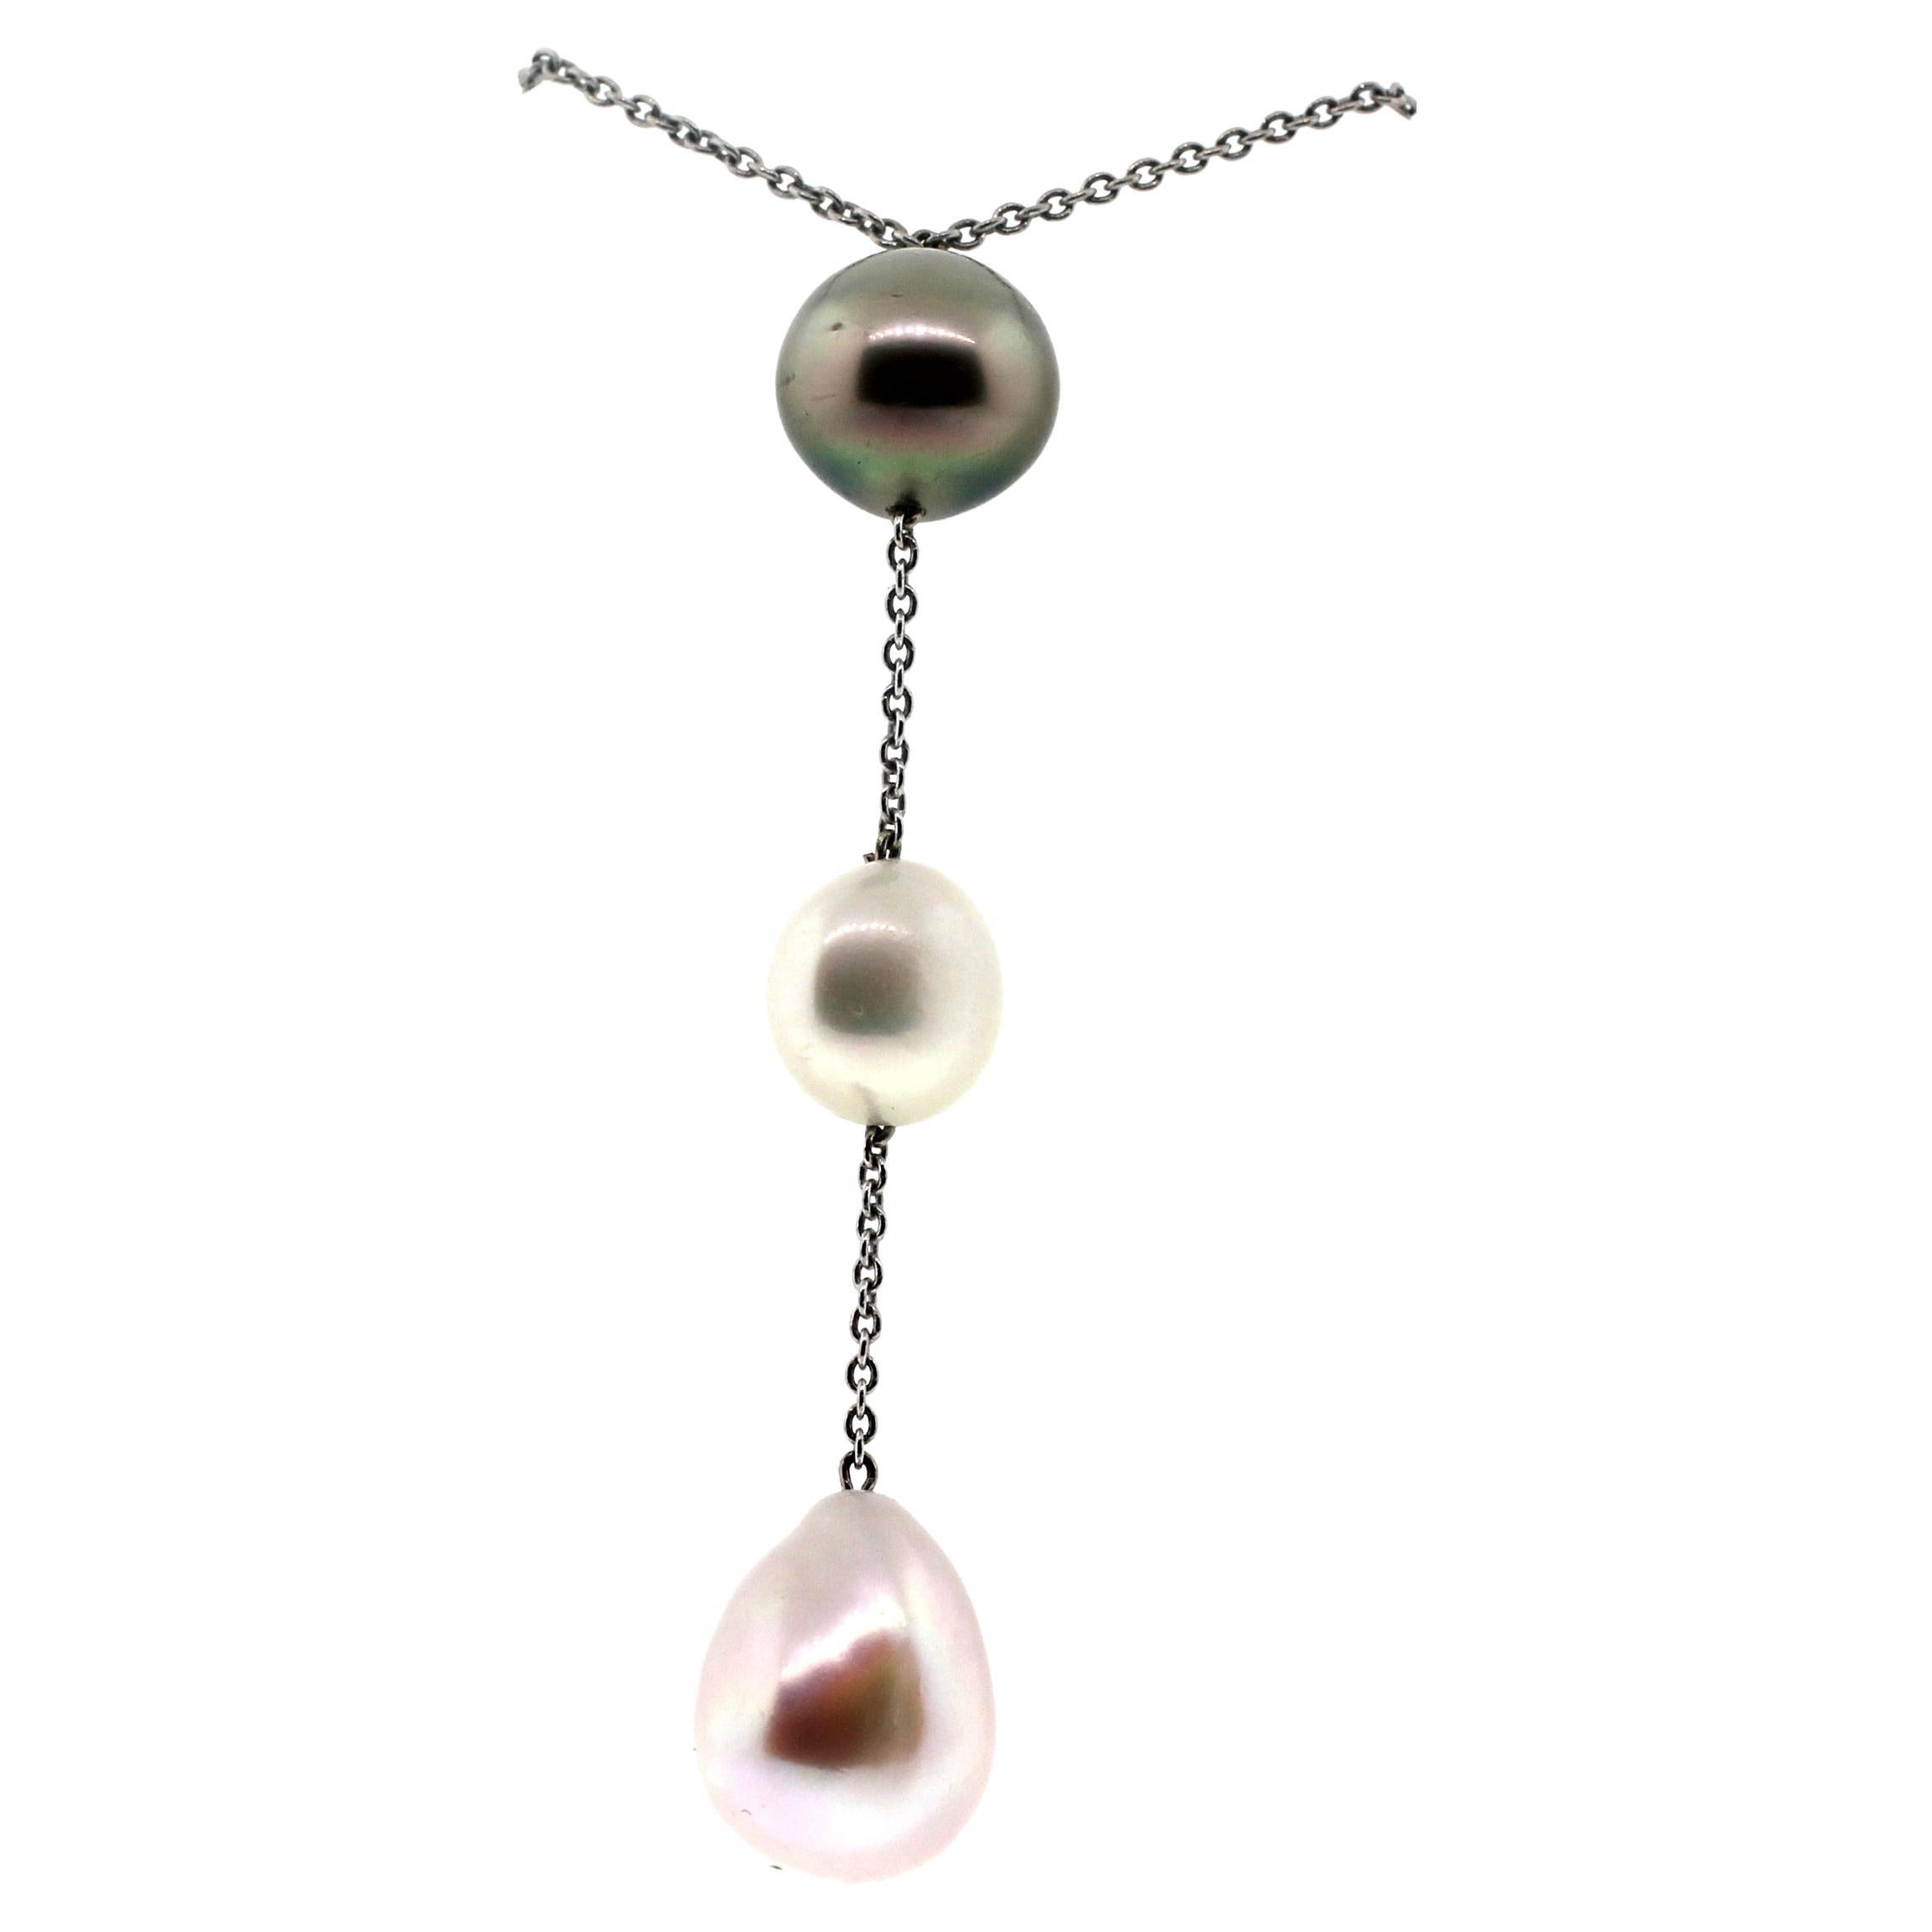 Bead Hakimoto 18K White Gold Chain With Tahiti and 8 Baroque Pearl Necklace